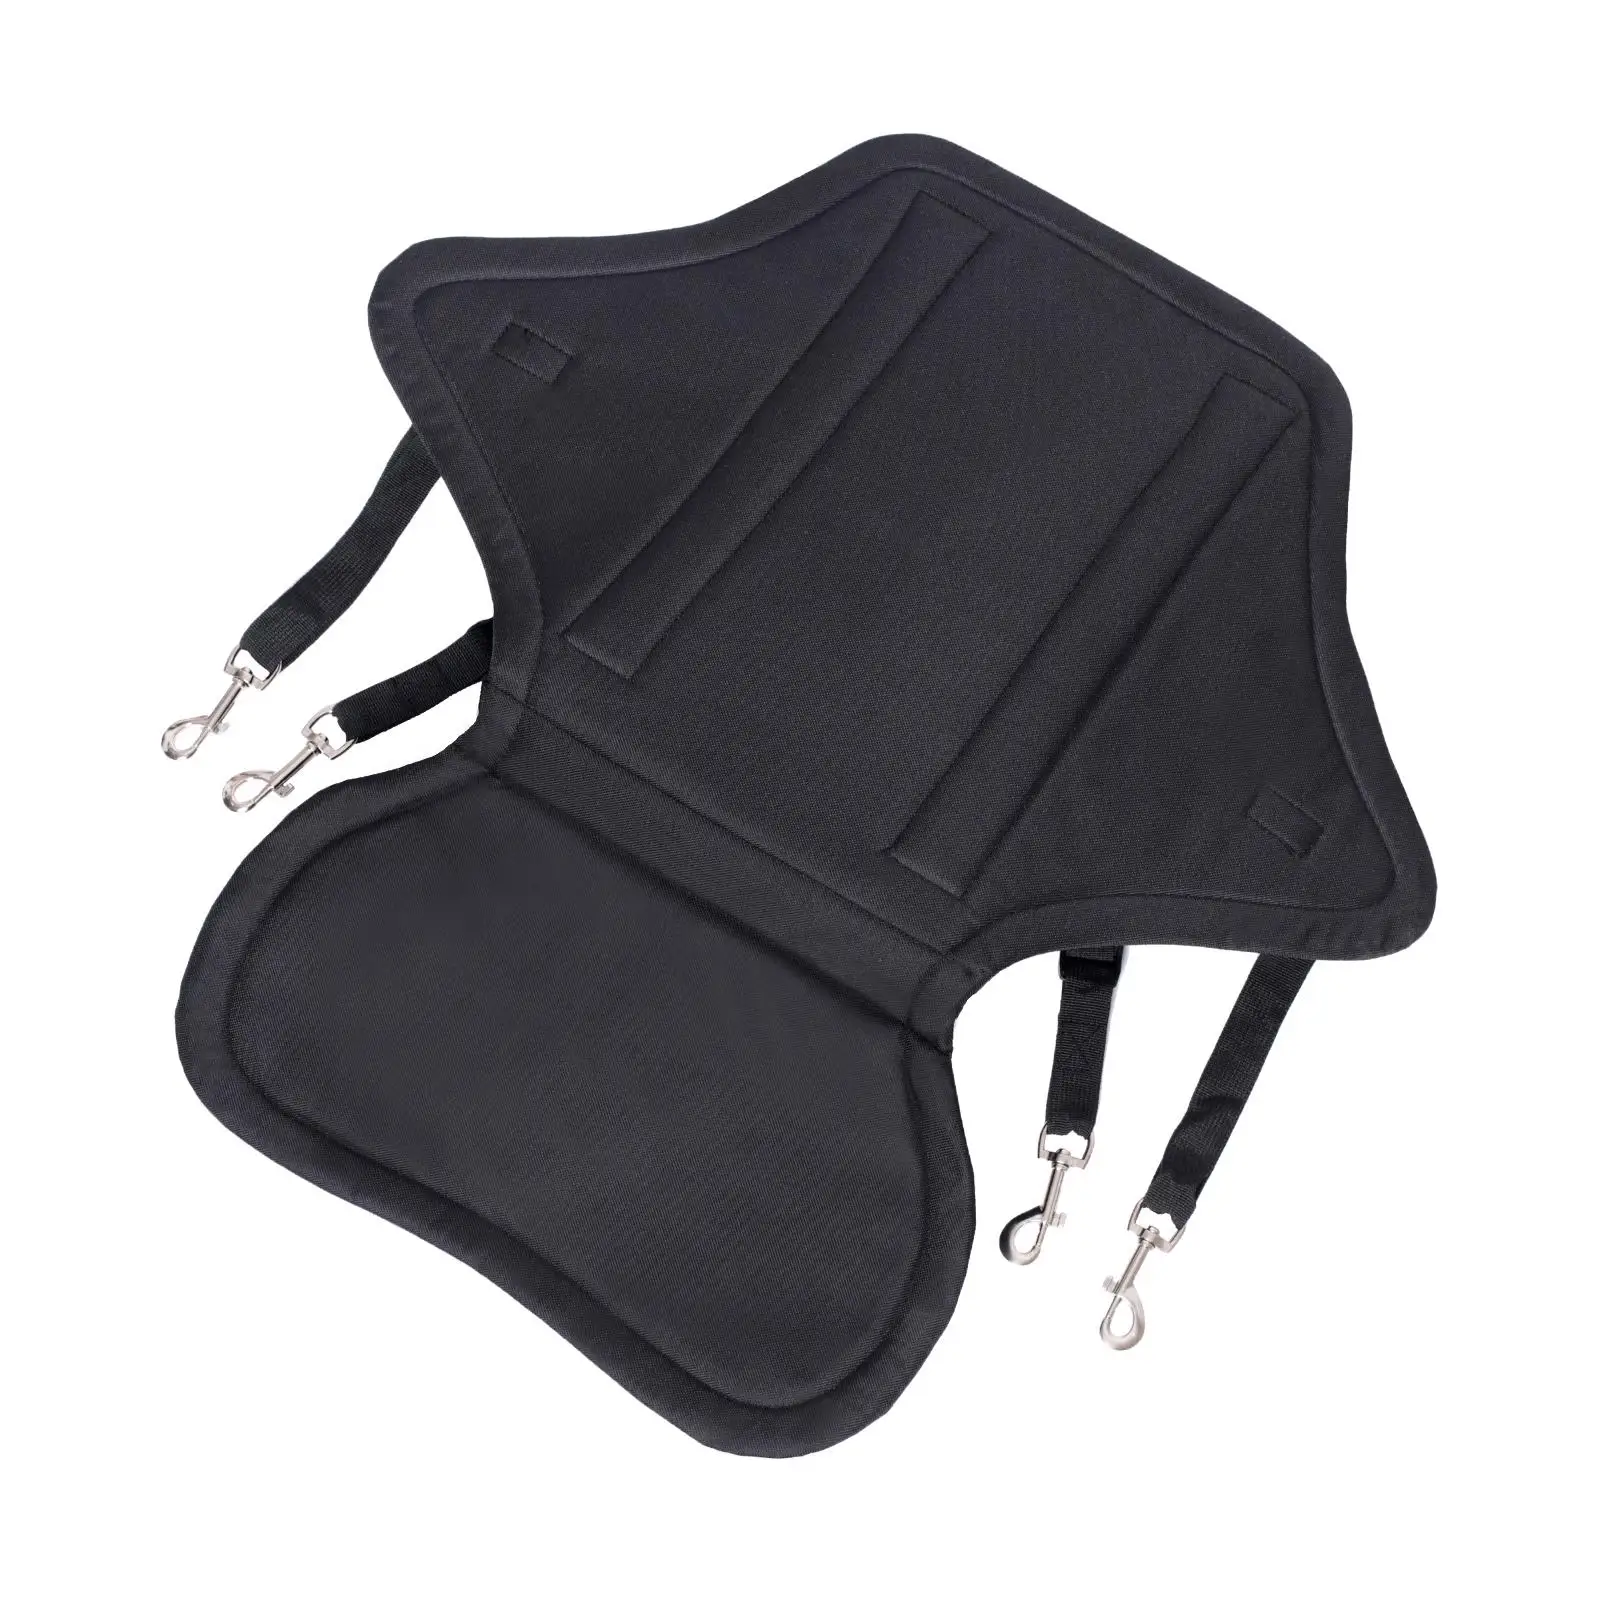 Detachable Canoe Seat Cushion Back Rest Comfortable Luxurious with Support Pad